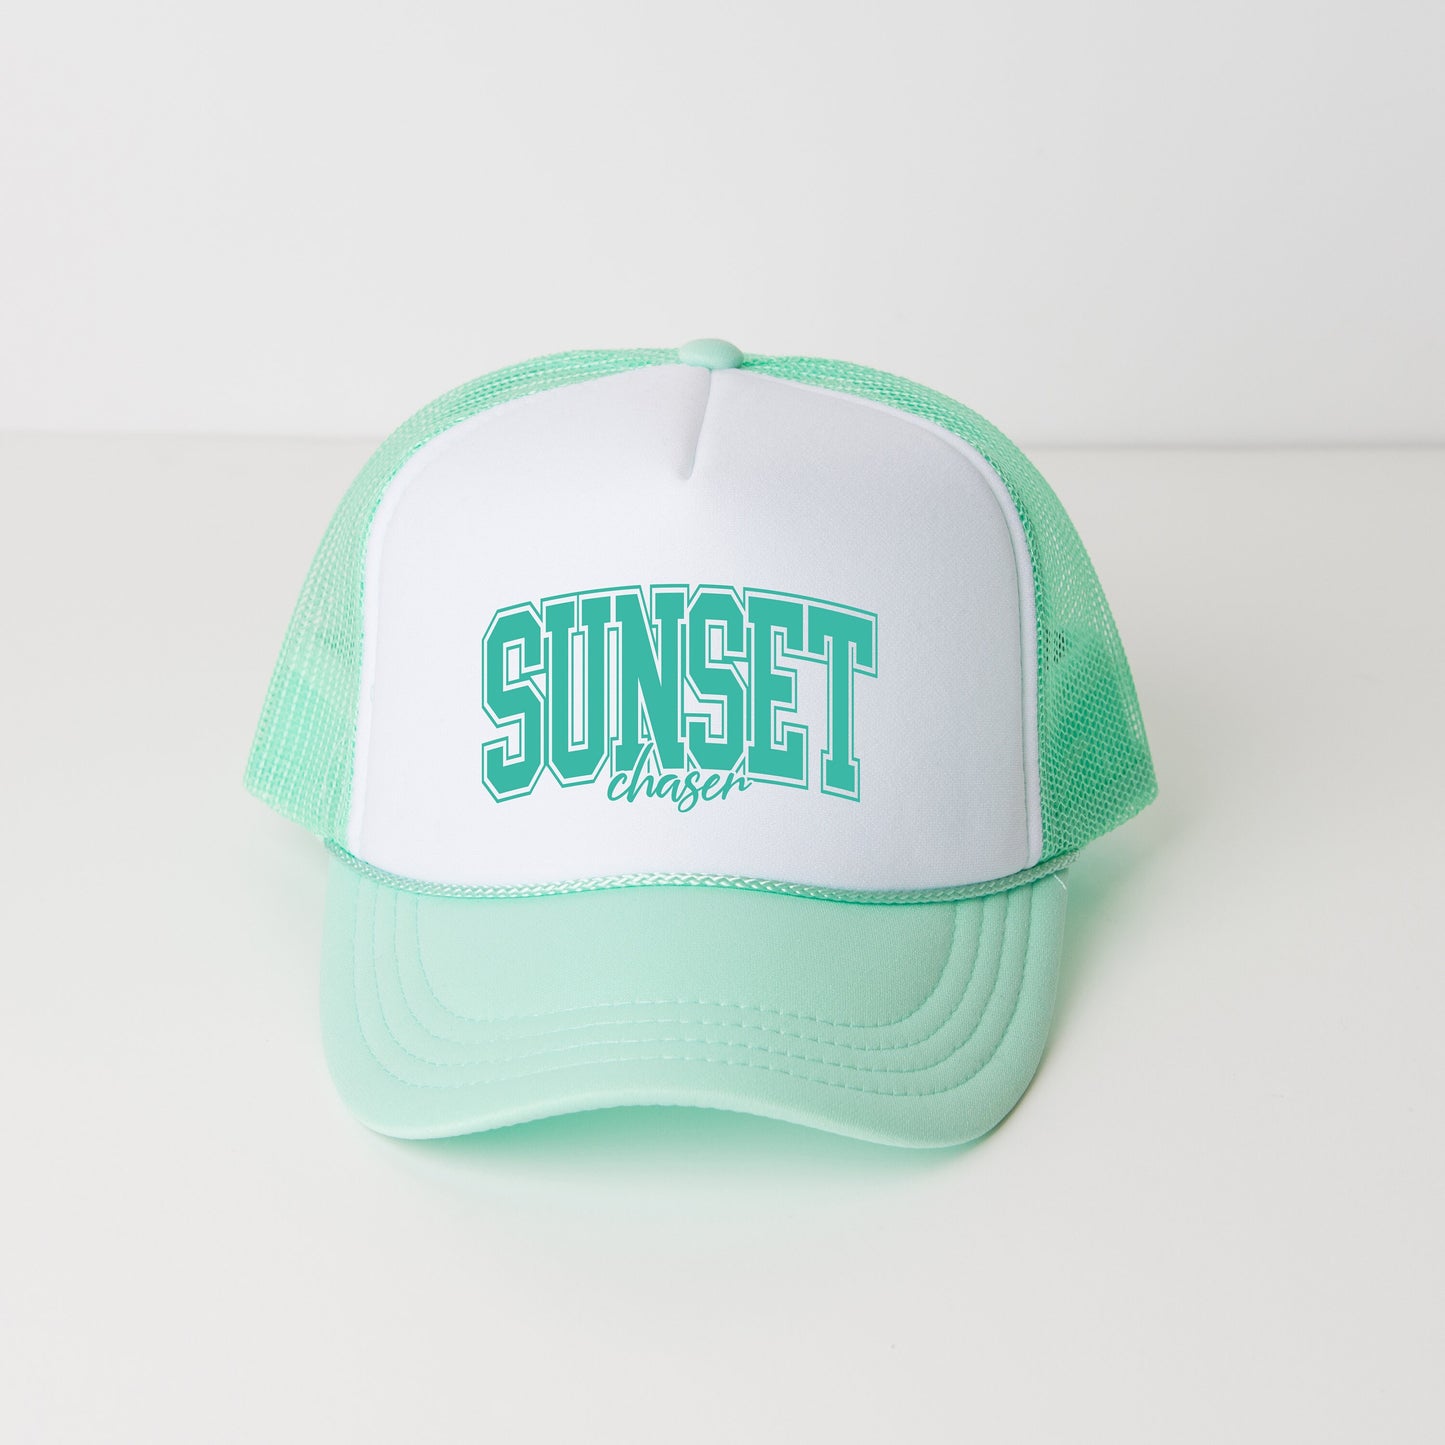 a green and white hat with the word sunset on it